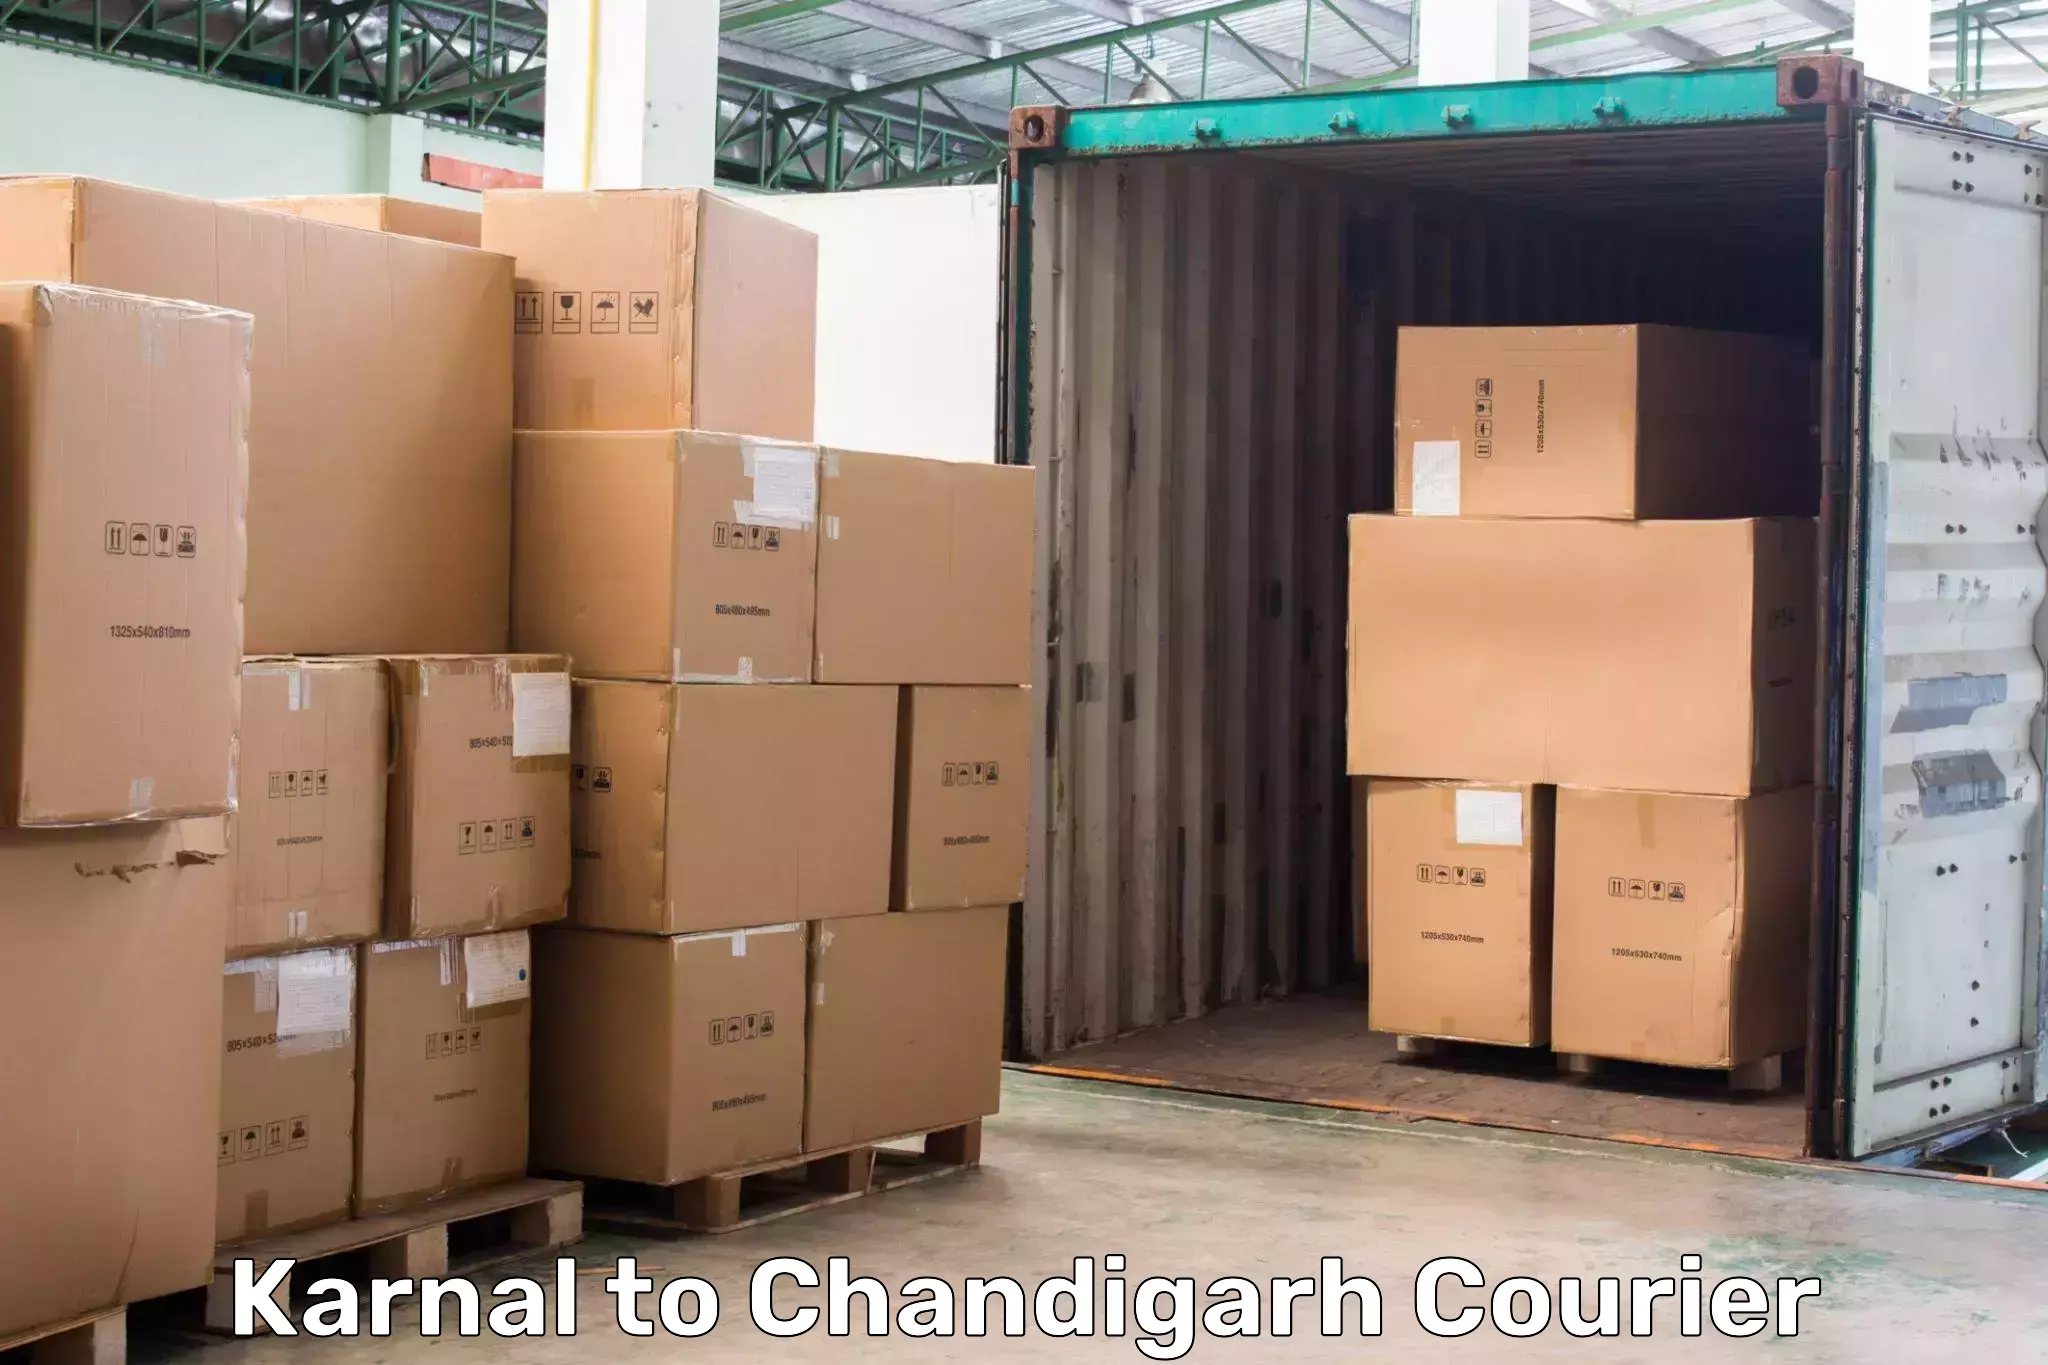 Seamless shipping experience Karnal to Chandigarh